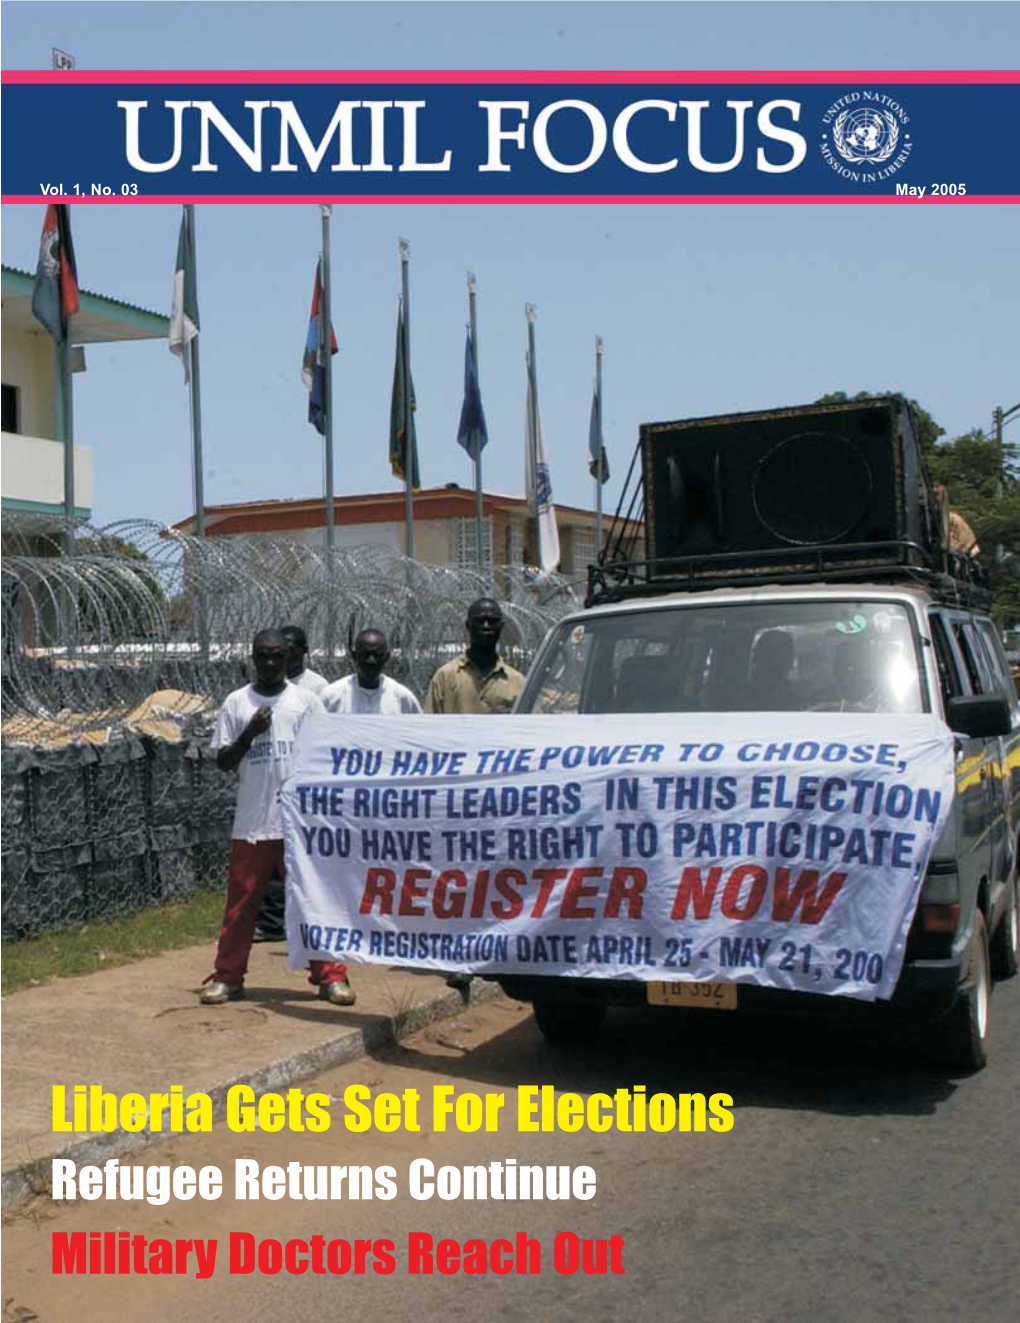 Liberia Gets Set for Elections